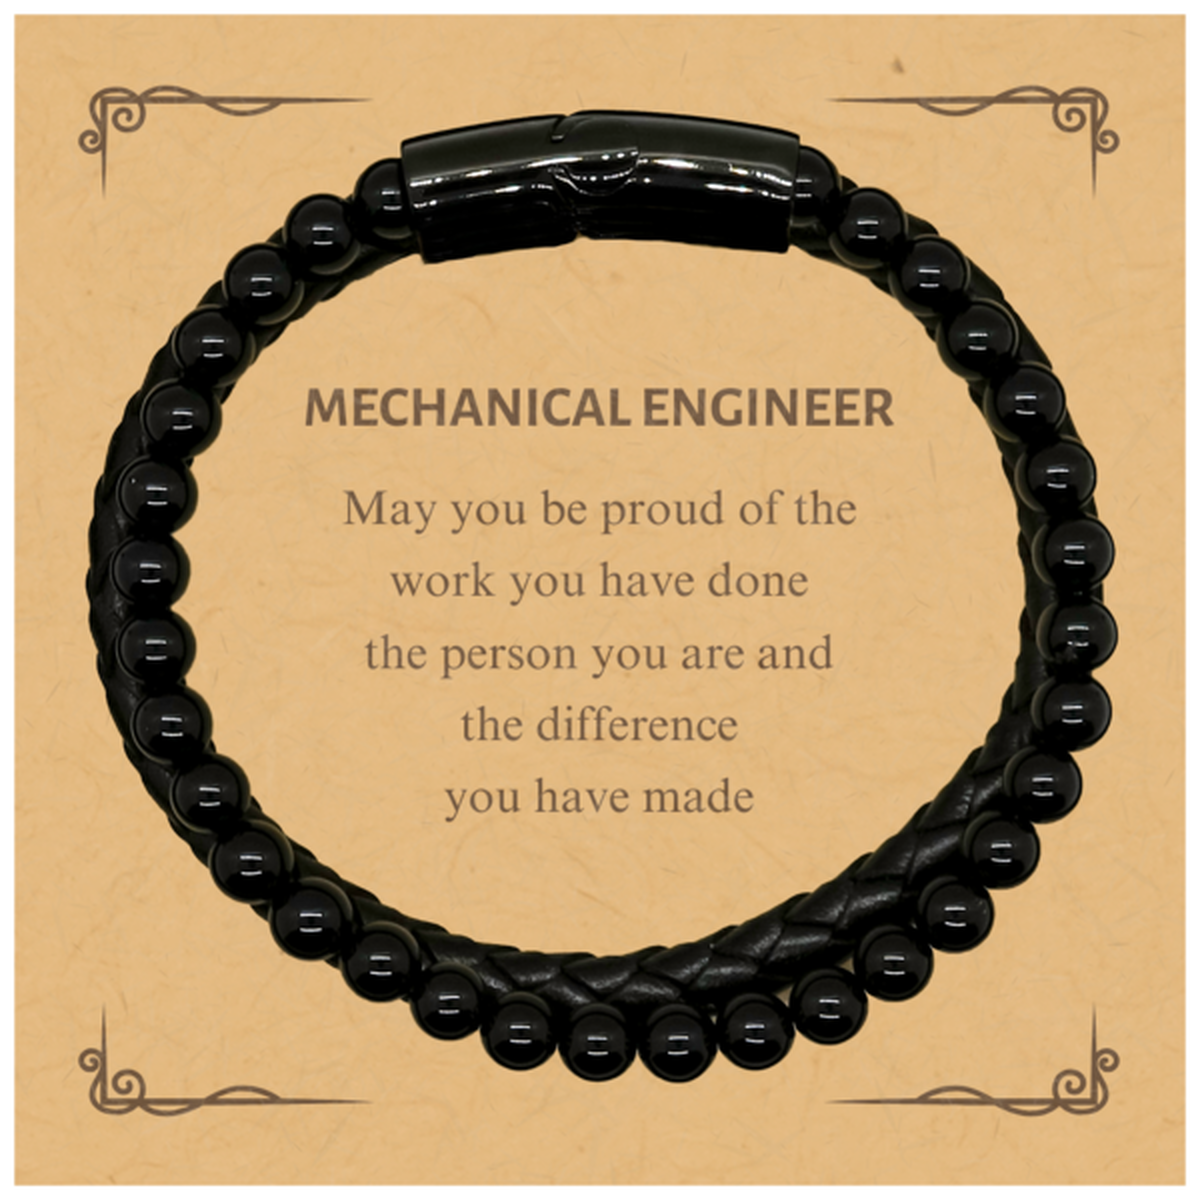 Mechanical Engineer May you be proud of the work you have done, Retirement Mechanical Engineer Stone Leather Bracelets for Colleague Appreciation Gifts Amazing for Mechanical Engineer